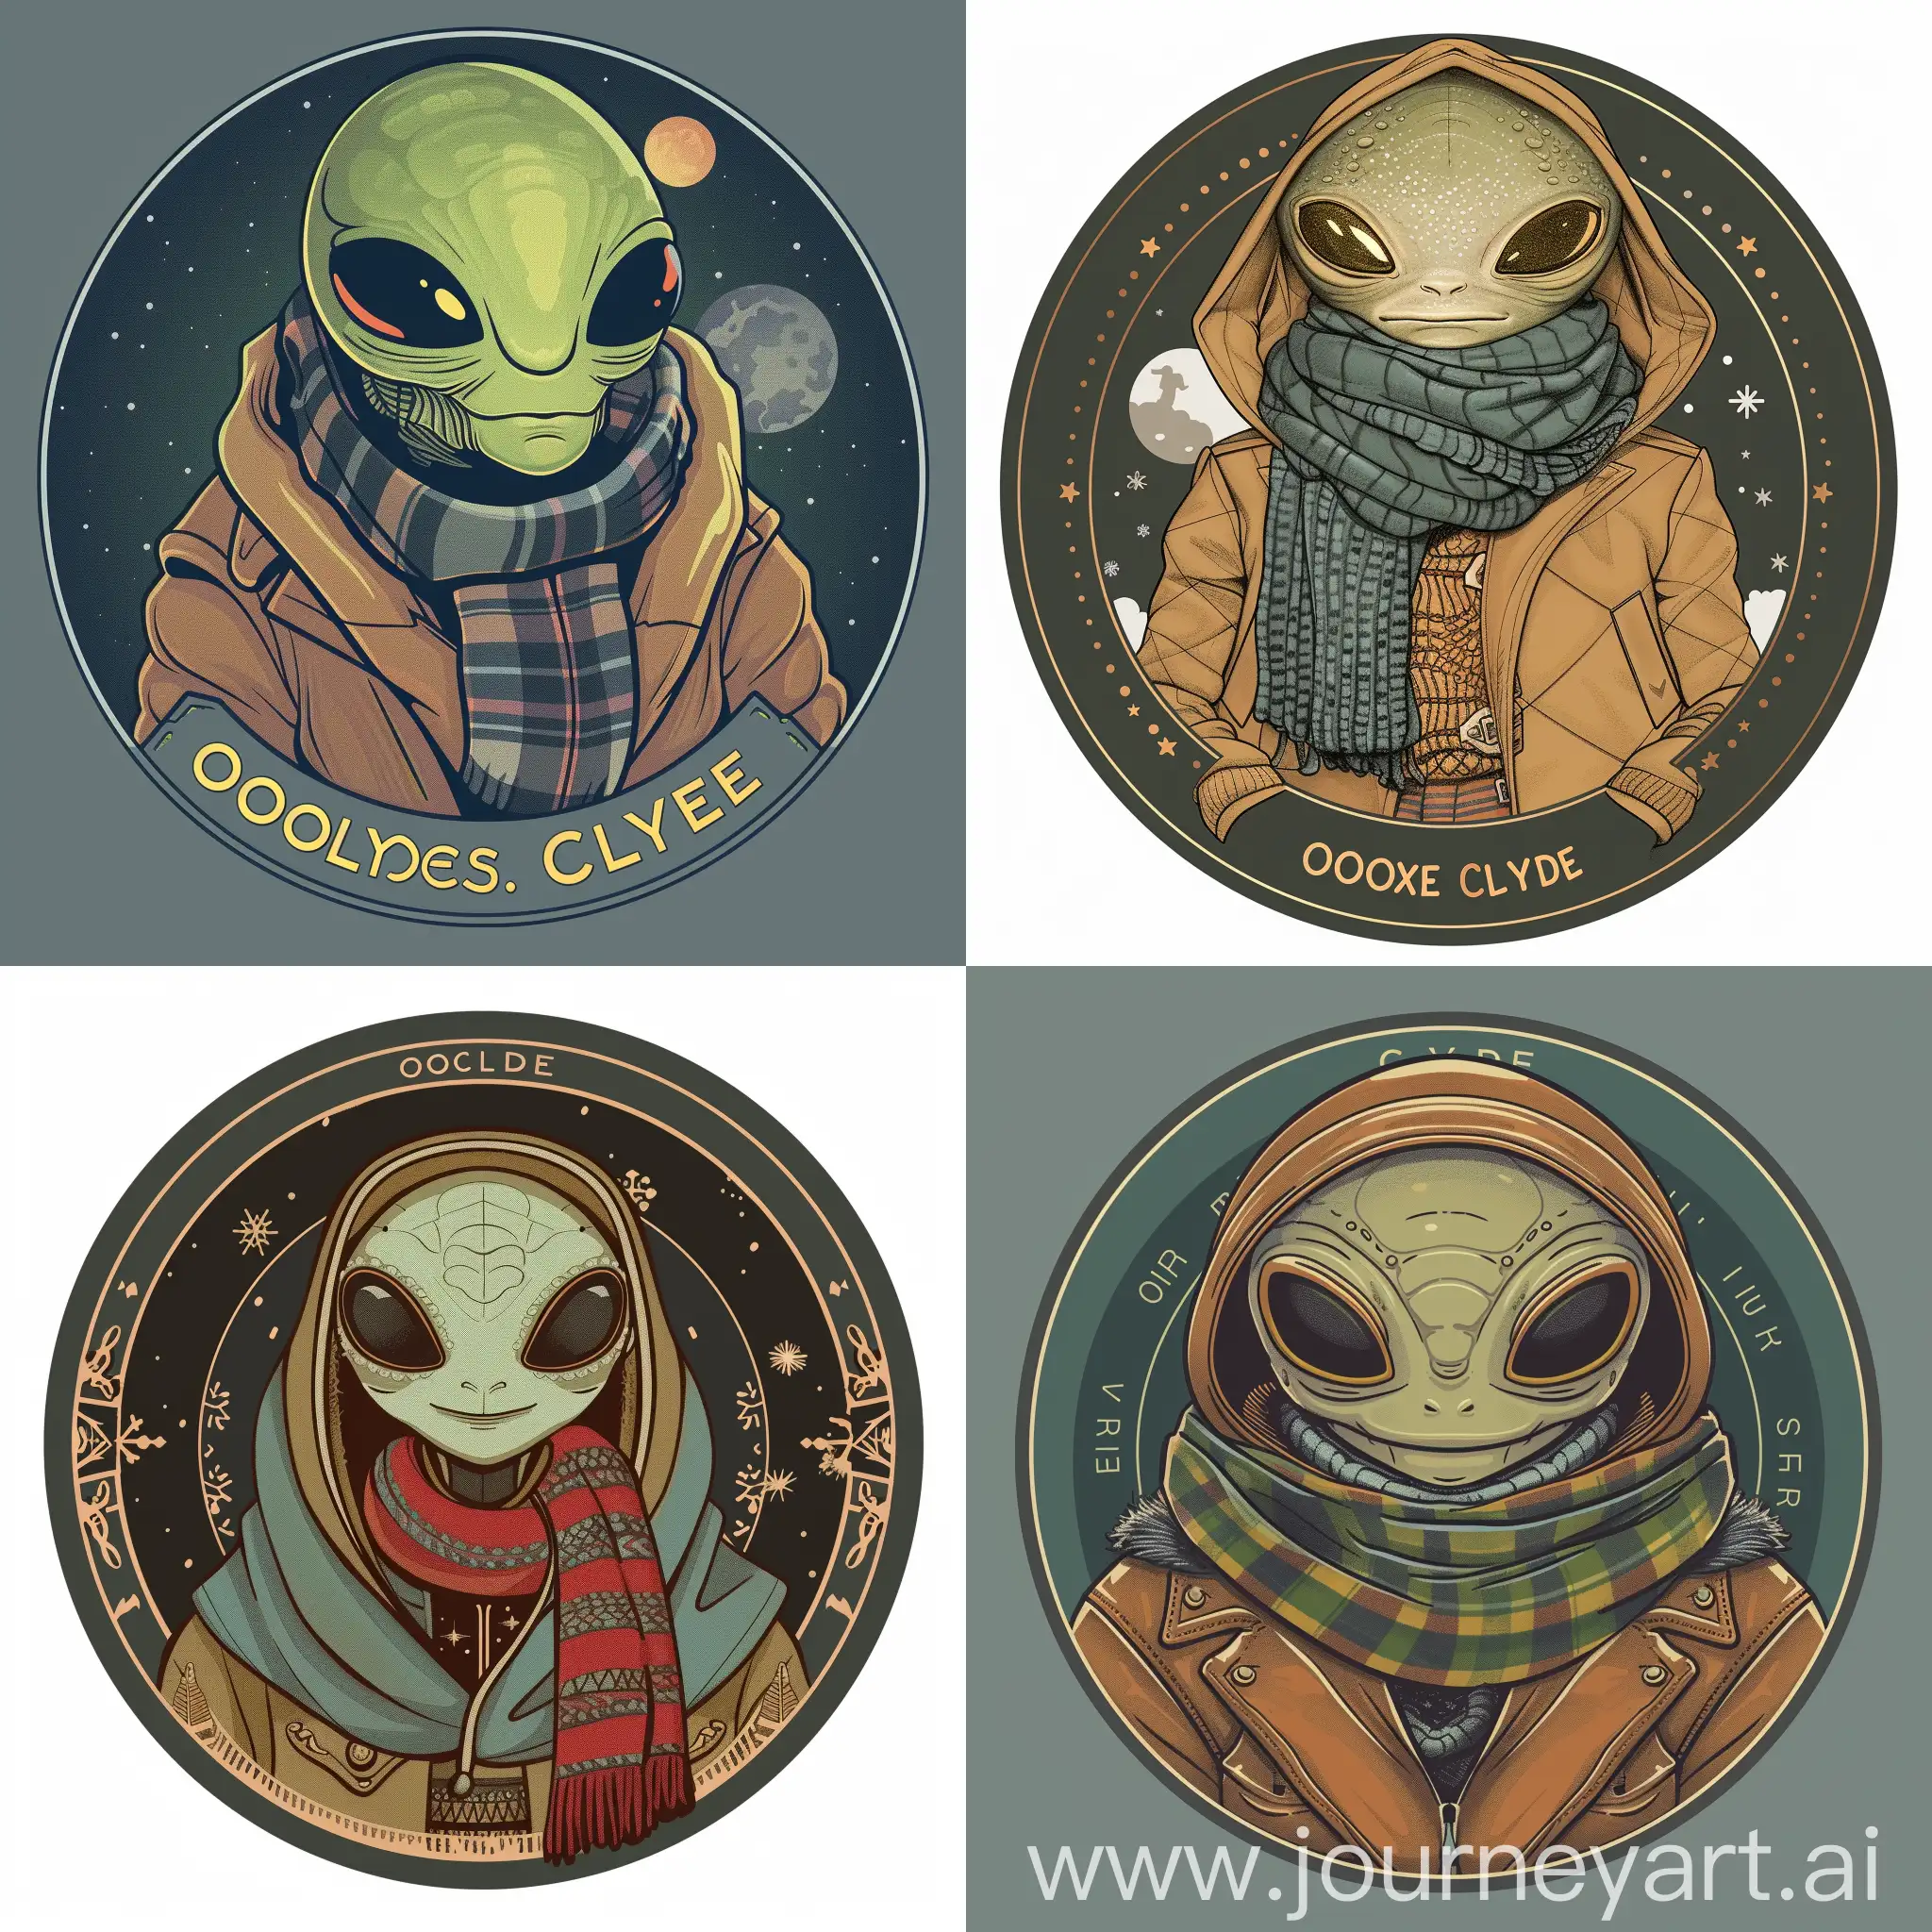 Friendly-Alien-in-Winter-Coat-and-Scarf-Oracle-Clyde-Logo-Design